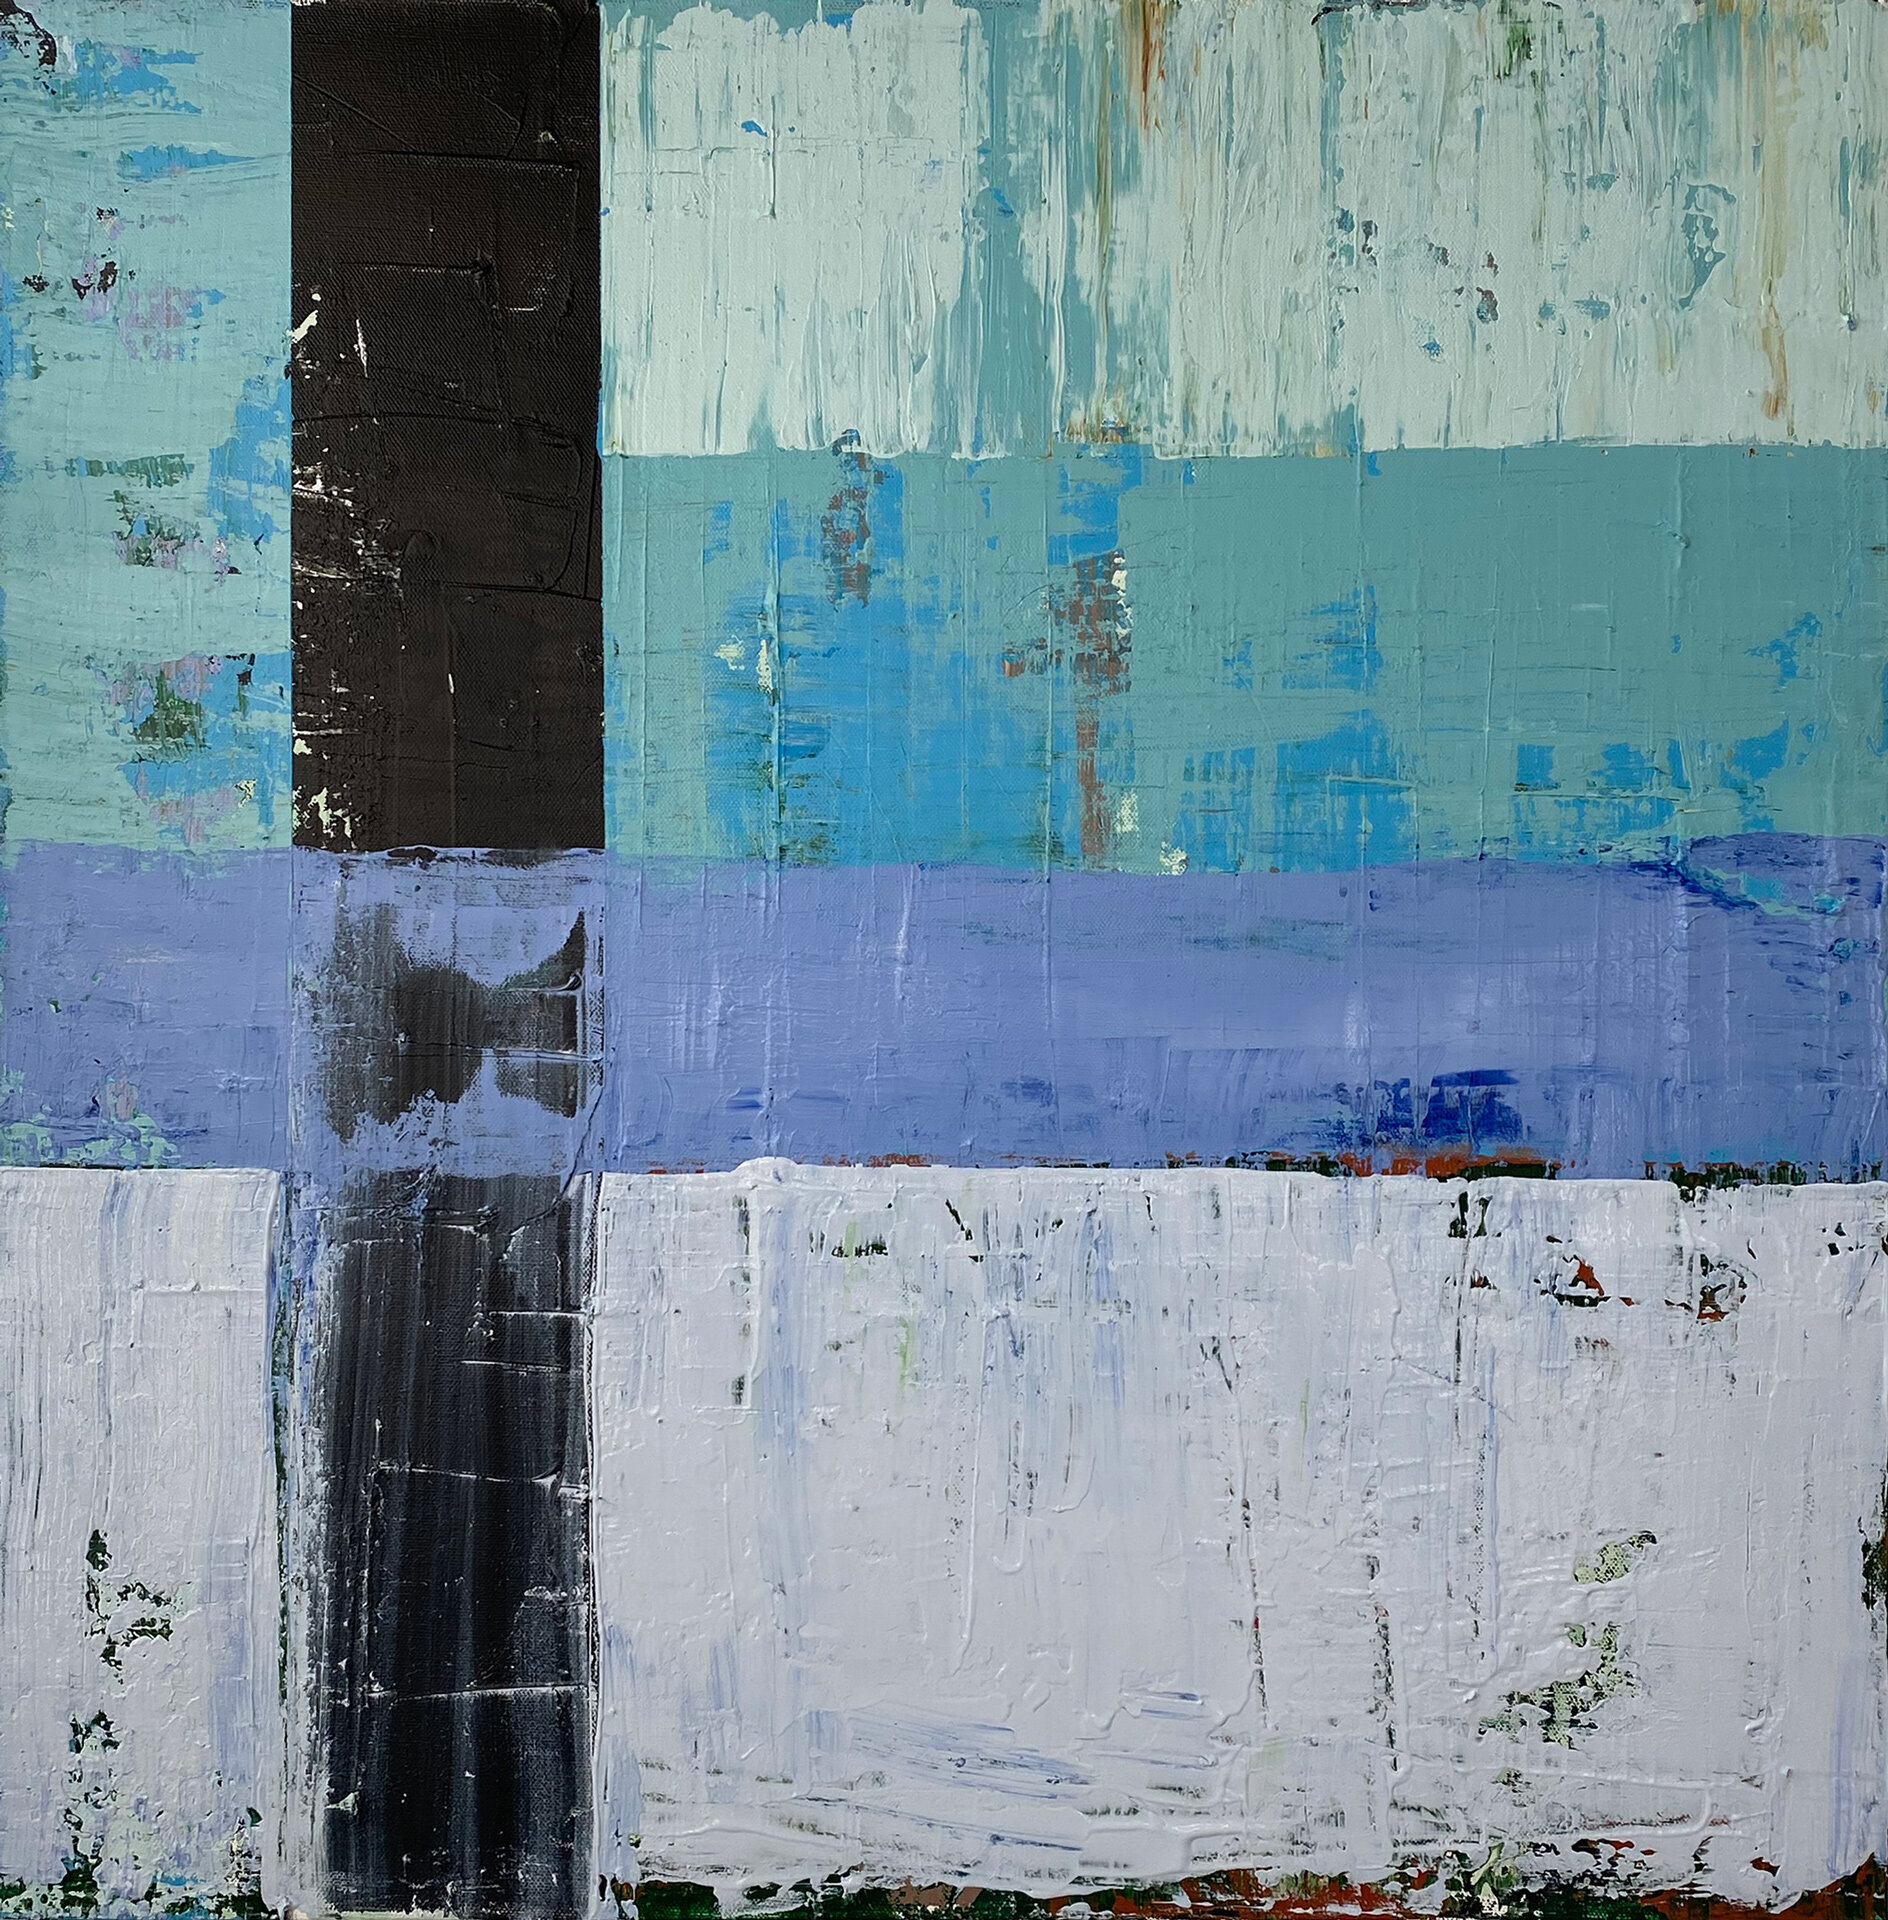   Translation of “White Ladder” VI (D. Gray) , mixed media on canvas, 24 x 24 inches 